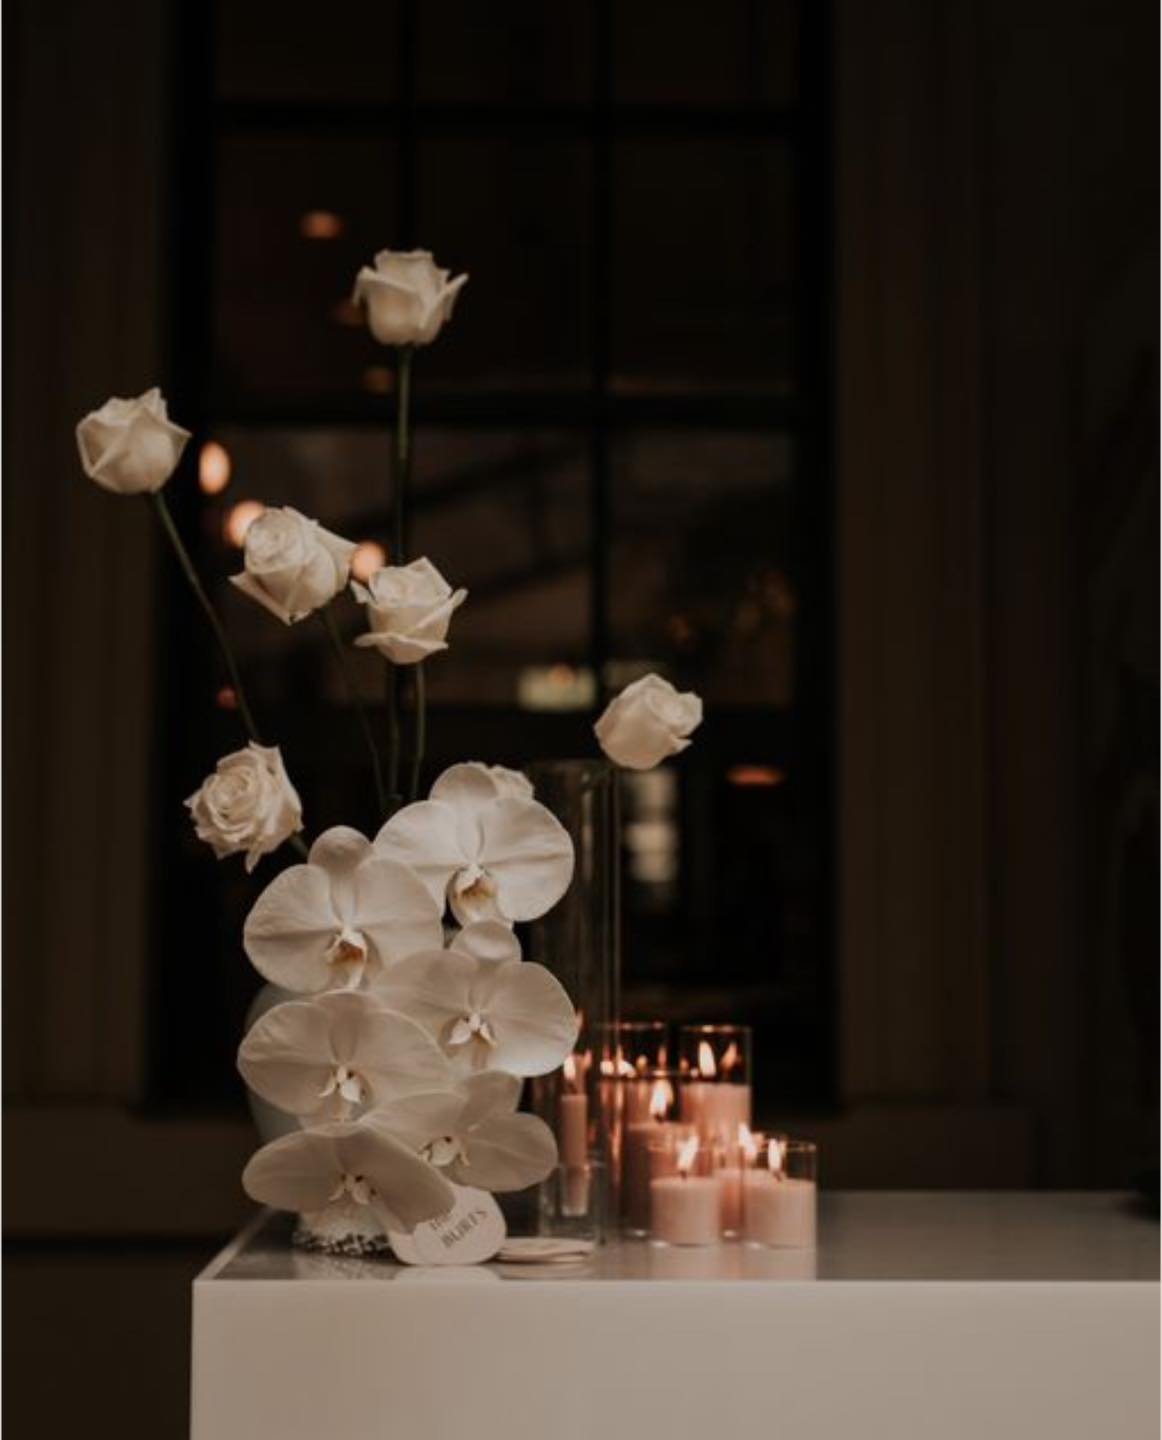 We still dream about this gorgeous arrangement from Moonchild Creative for Kayla + Chris&rsquo; wedding @treasury1860

Photo by Lilac in Hand Photography

#adelaideweddings #adelaideweddingphotographer #adelaideweddingvenue #adelaideweddingstylist #a